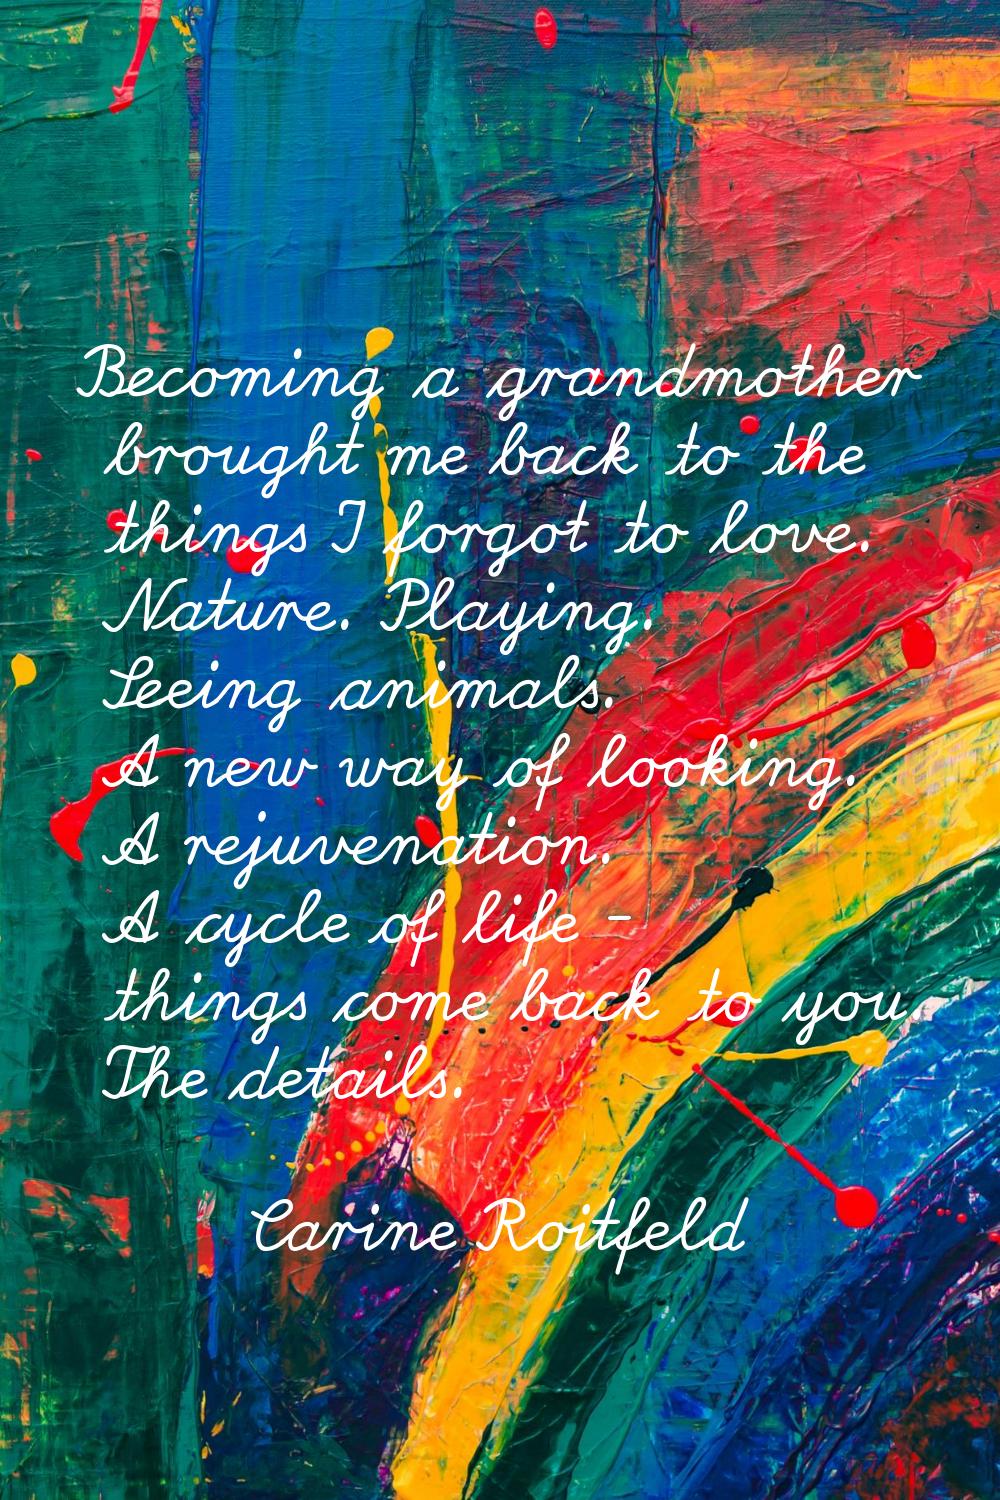 Becoming a grandmother brought me back to the things I forgot to love. Nature. Playing. Seeing anim